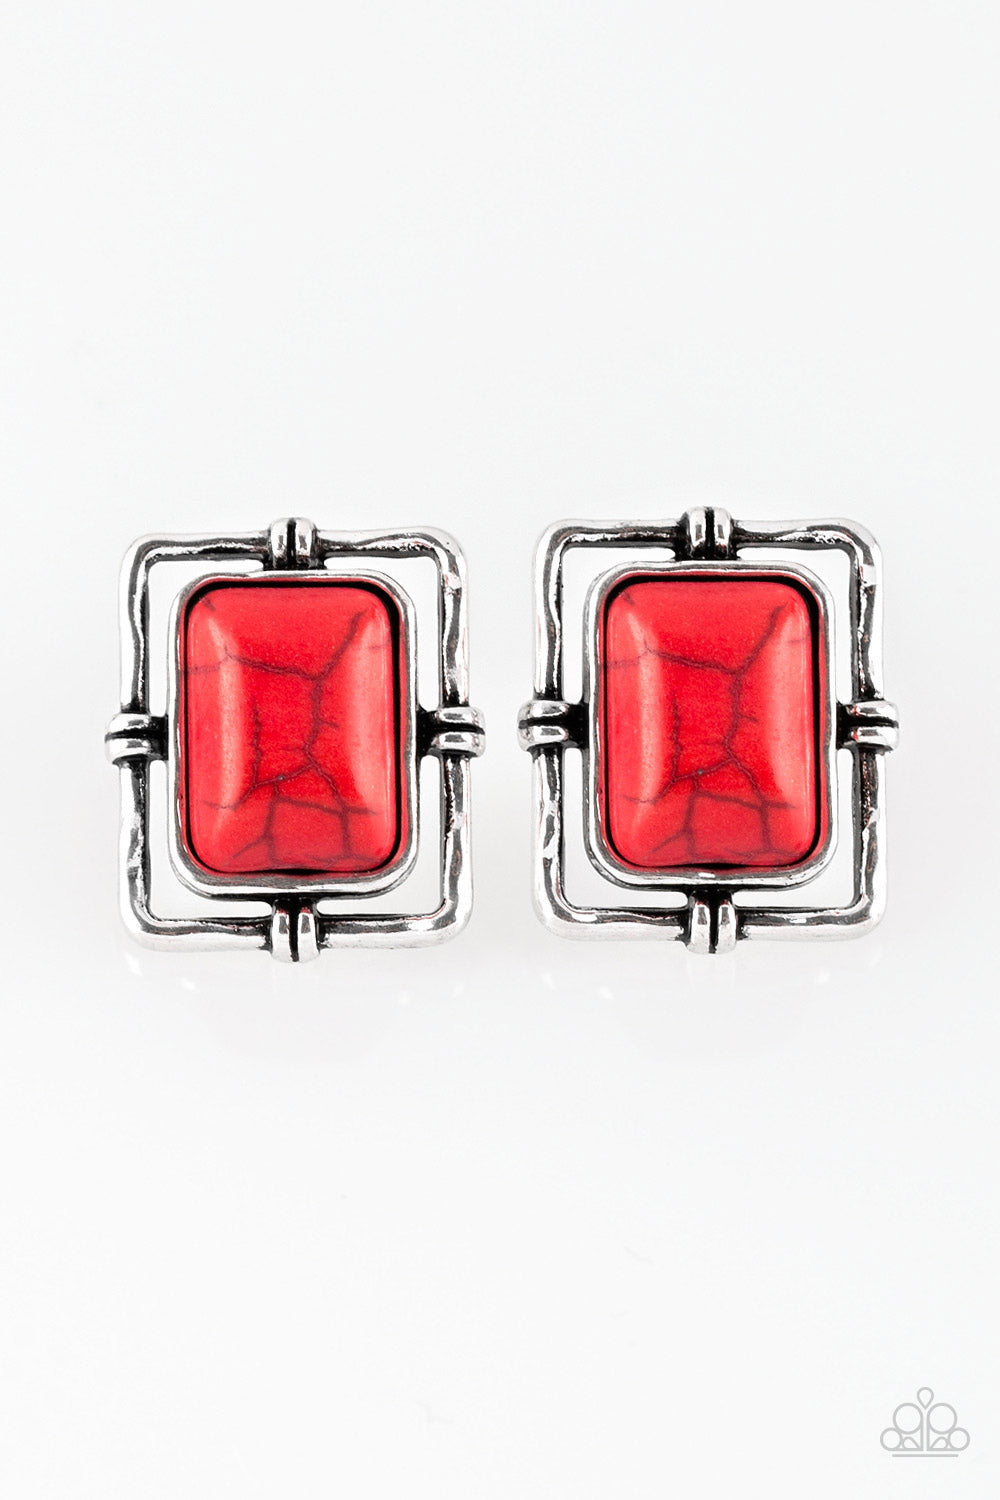 Paparazzi Accessories Center STAGECOACH - Red Earrings 